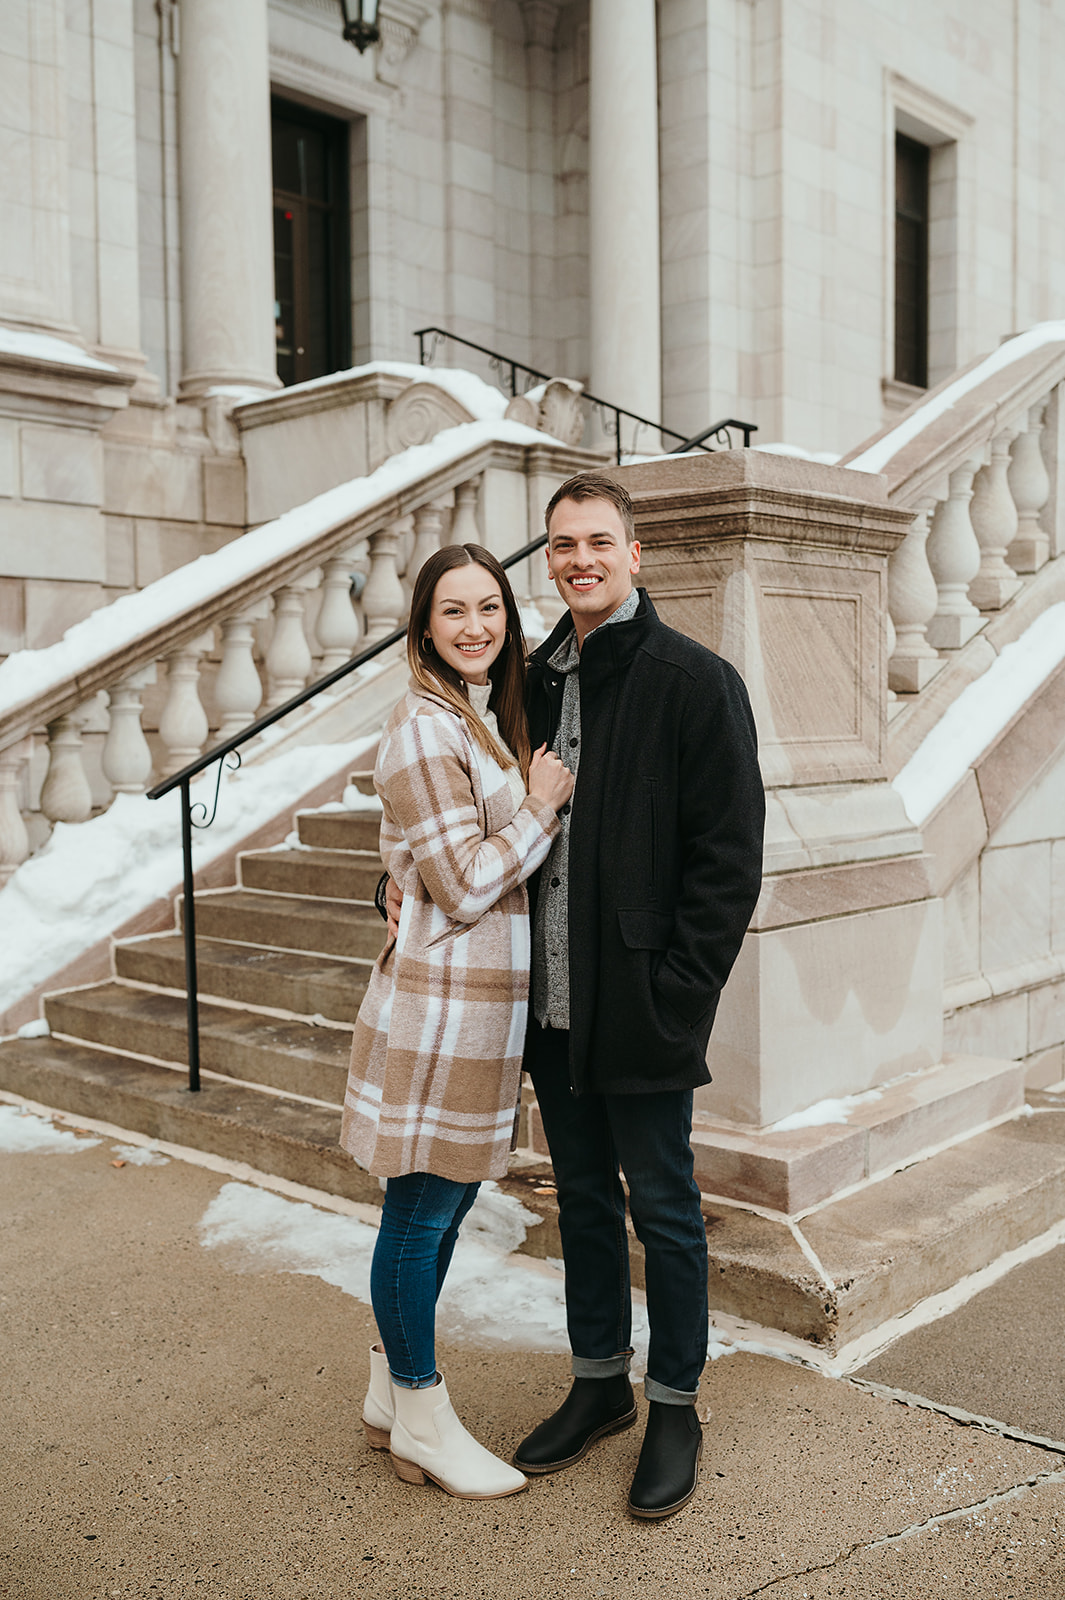 A couple who took their engagement photos in front of a historic library in downtown Saint Paul MN